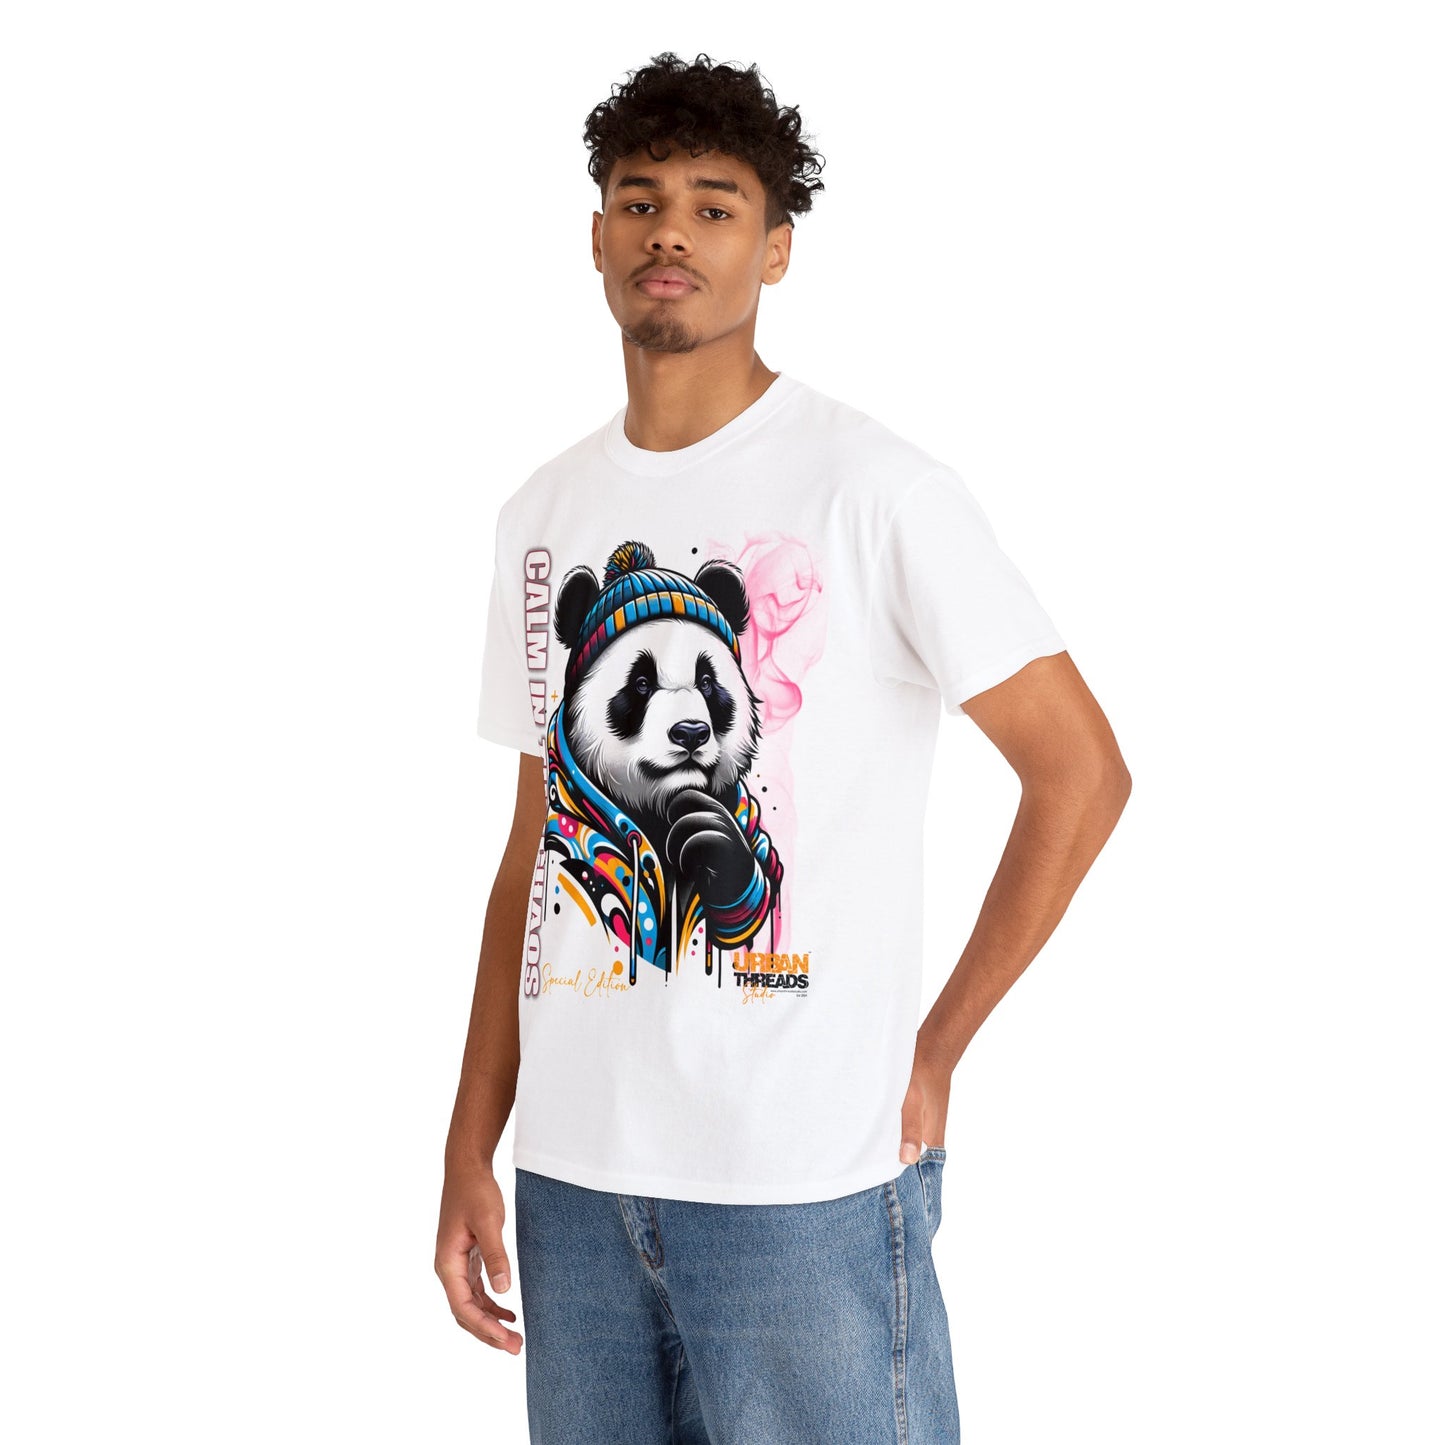 Calm in the Chaos Unisex Heavy Cotton Tee